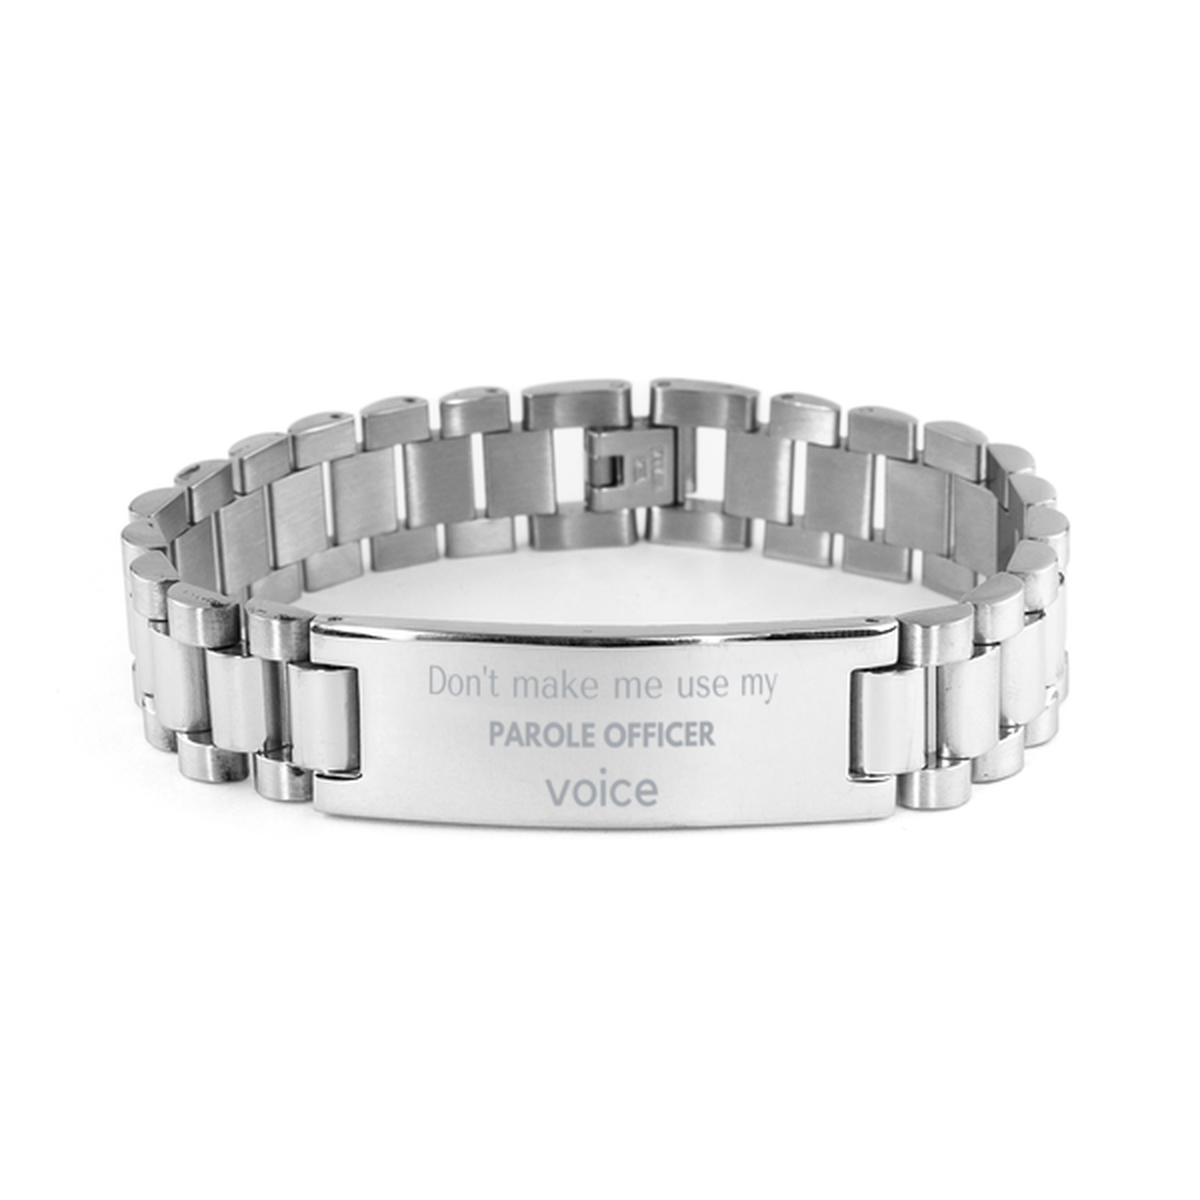 Don't make me use my Parole Officer voice, Sarcasm Parole Officer Gifts, Christmas Parole Officer Ladder Stainless Steel Bracelet Birthday Unique Gifts For Parole Officer Coworkers, Men, Women, Colleague, Friends